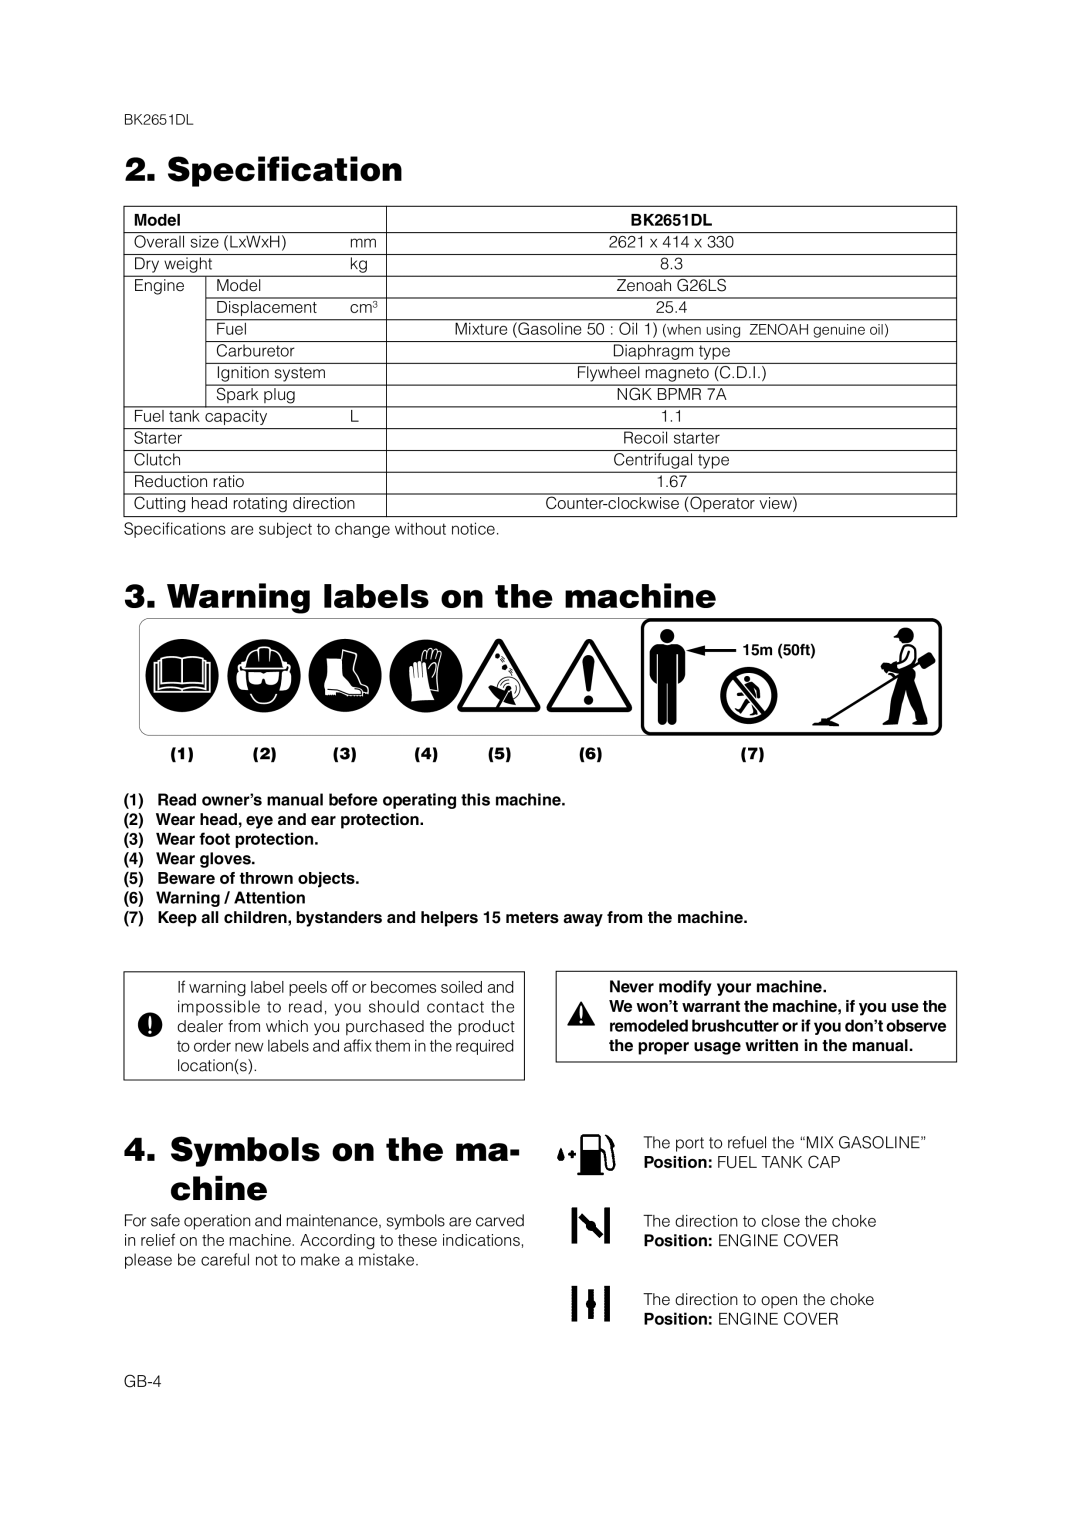 Zenoah BK2651DL Specification, Warning labels on the machine, Symbols on the ma- chine, Model, Never modify your machine 